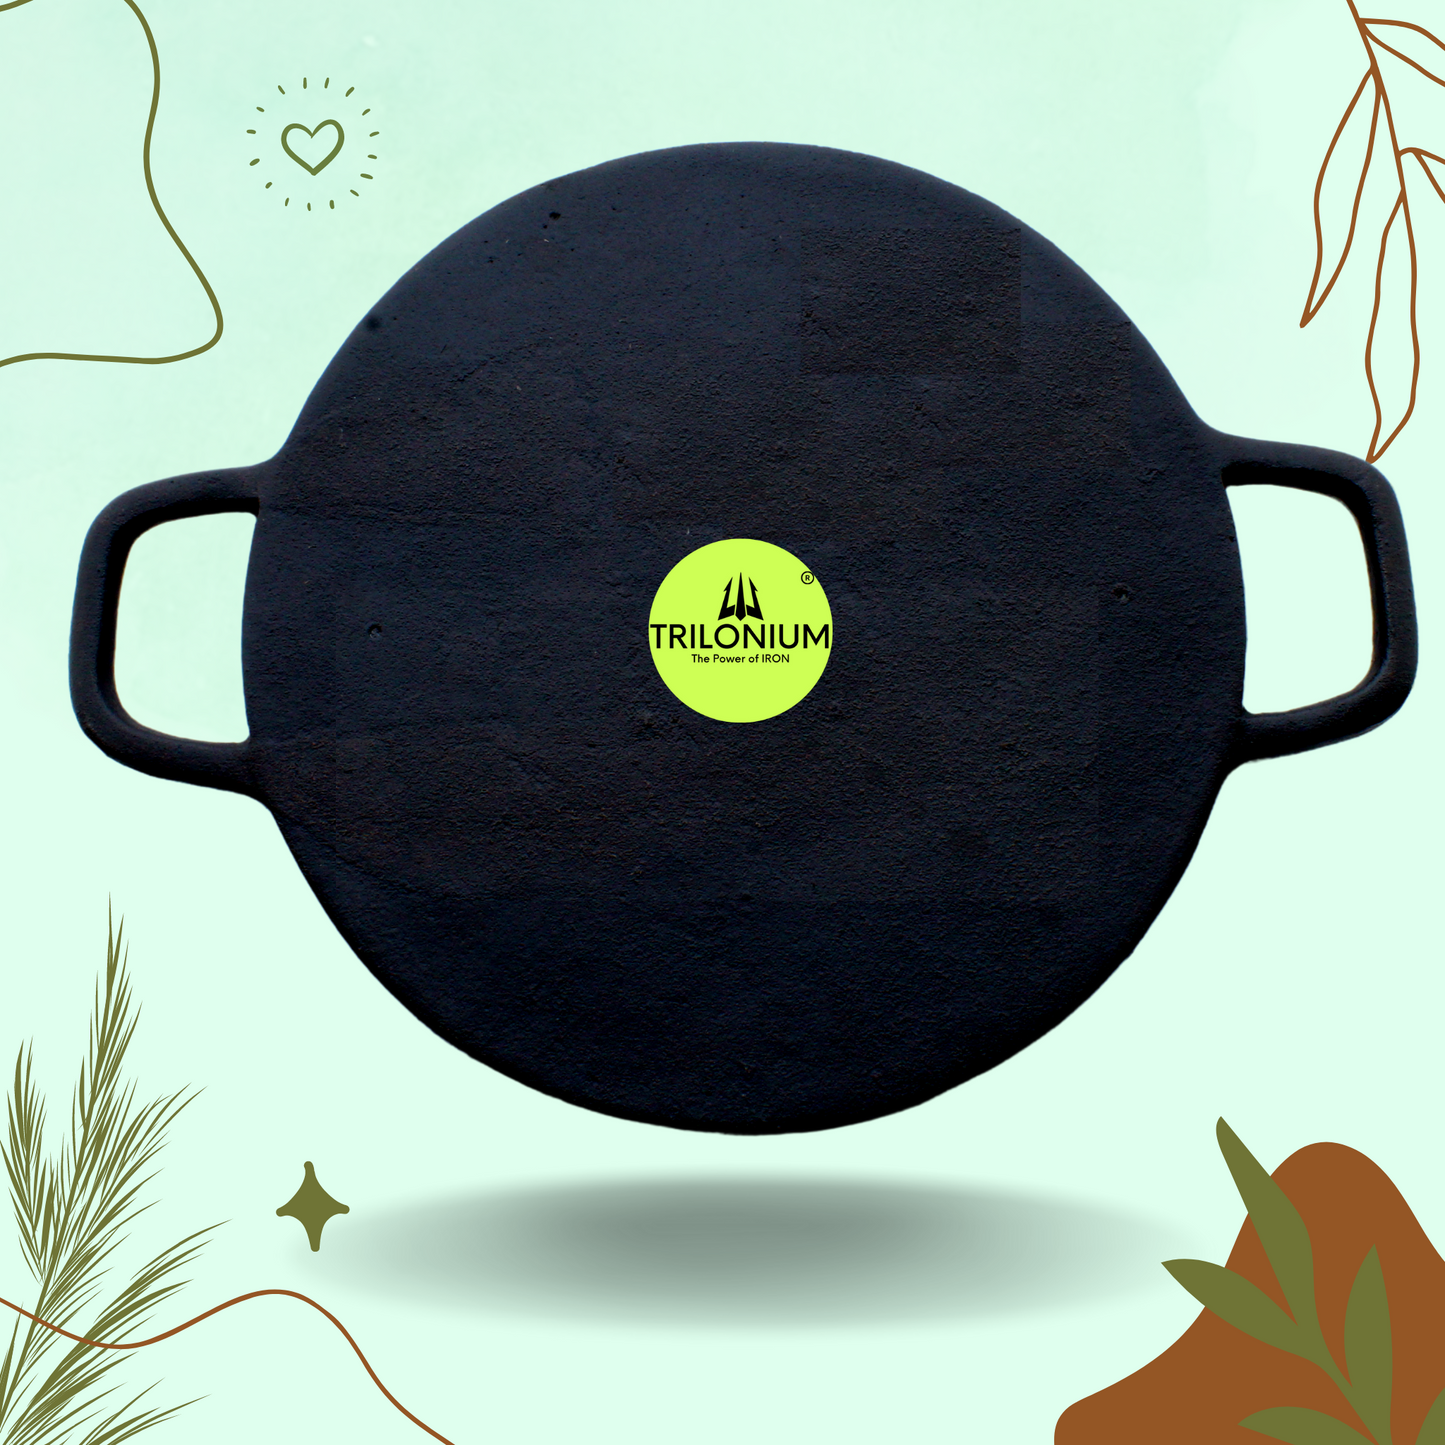 Trilonium Pre-Seasoned Cast Iron Concave Roti - Dosa Tawa 28 cms / 11 inches | Weighs 2.5 Kgs, Infinity